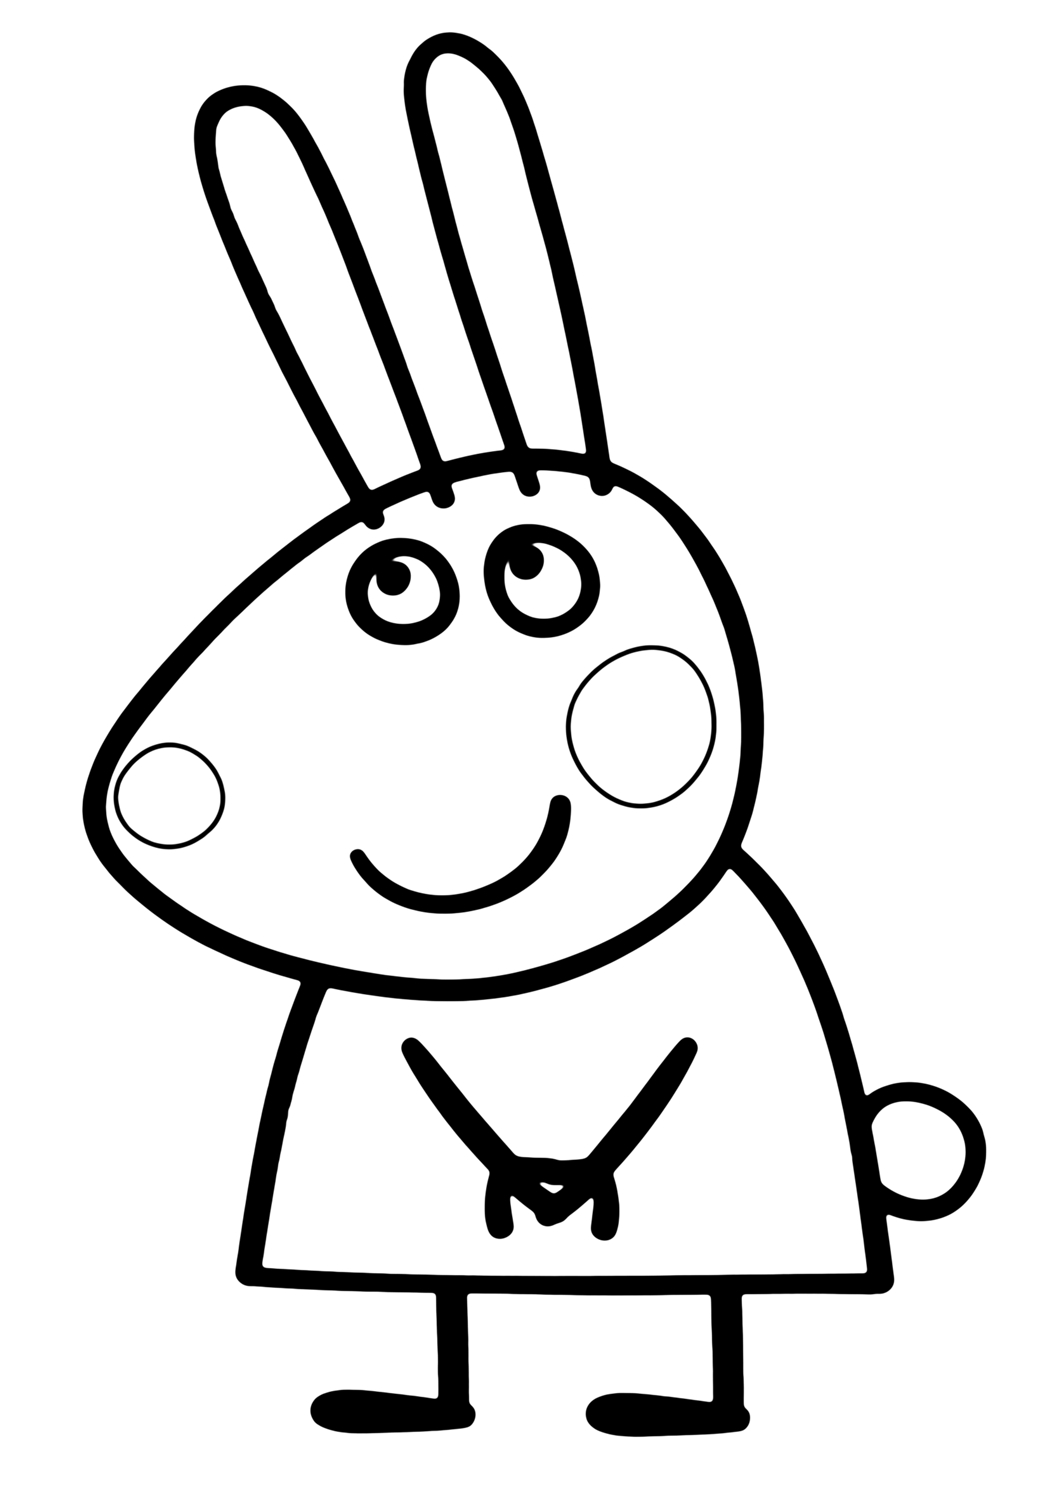 Cute Peppa Pig Christmas Coloring Pages #2559 Peppa Pig avec Peppa Pig A Colorier 